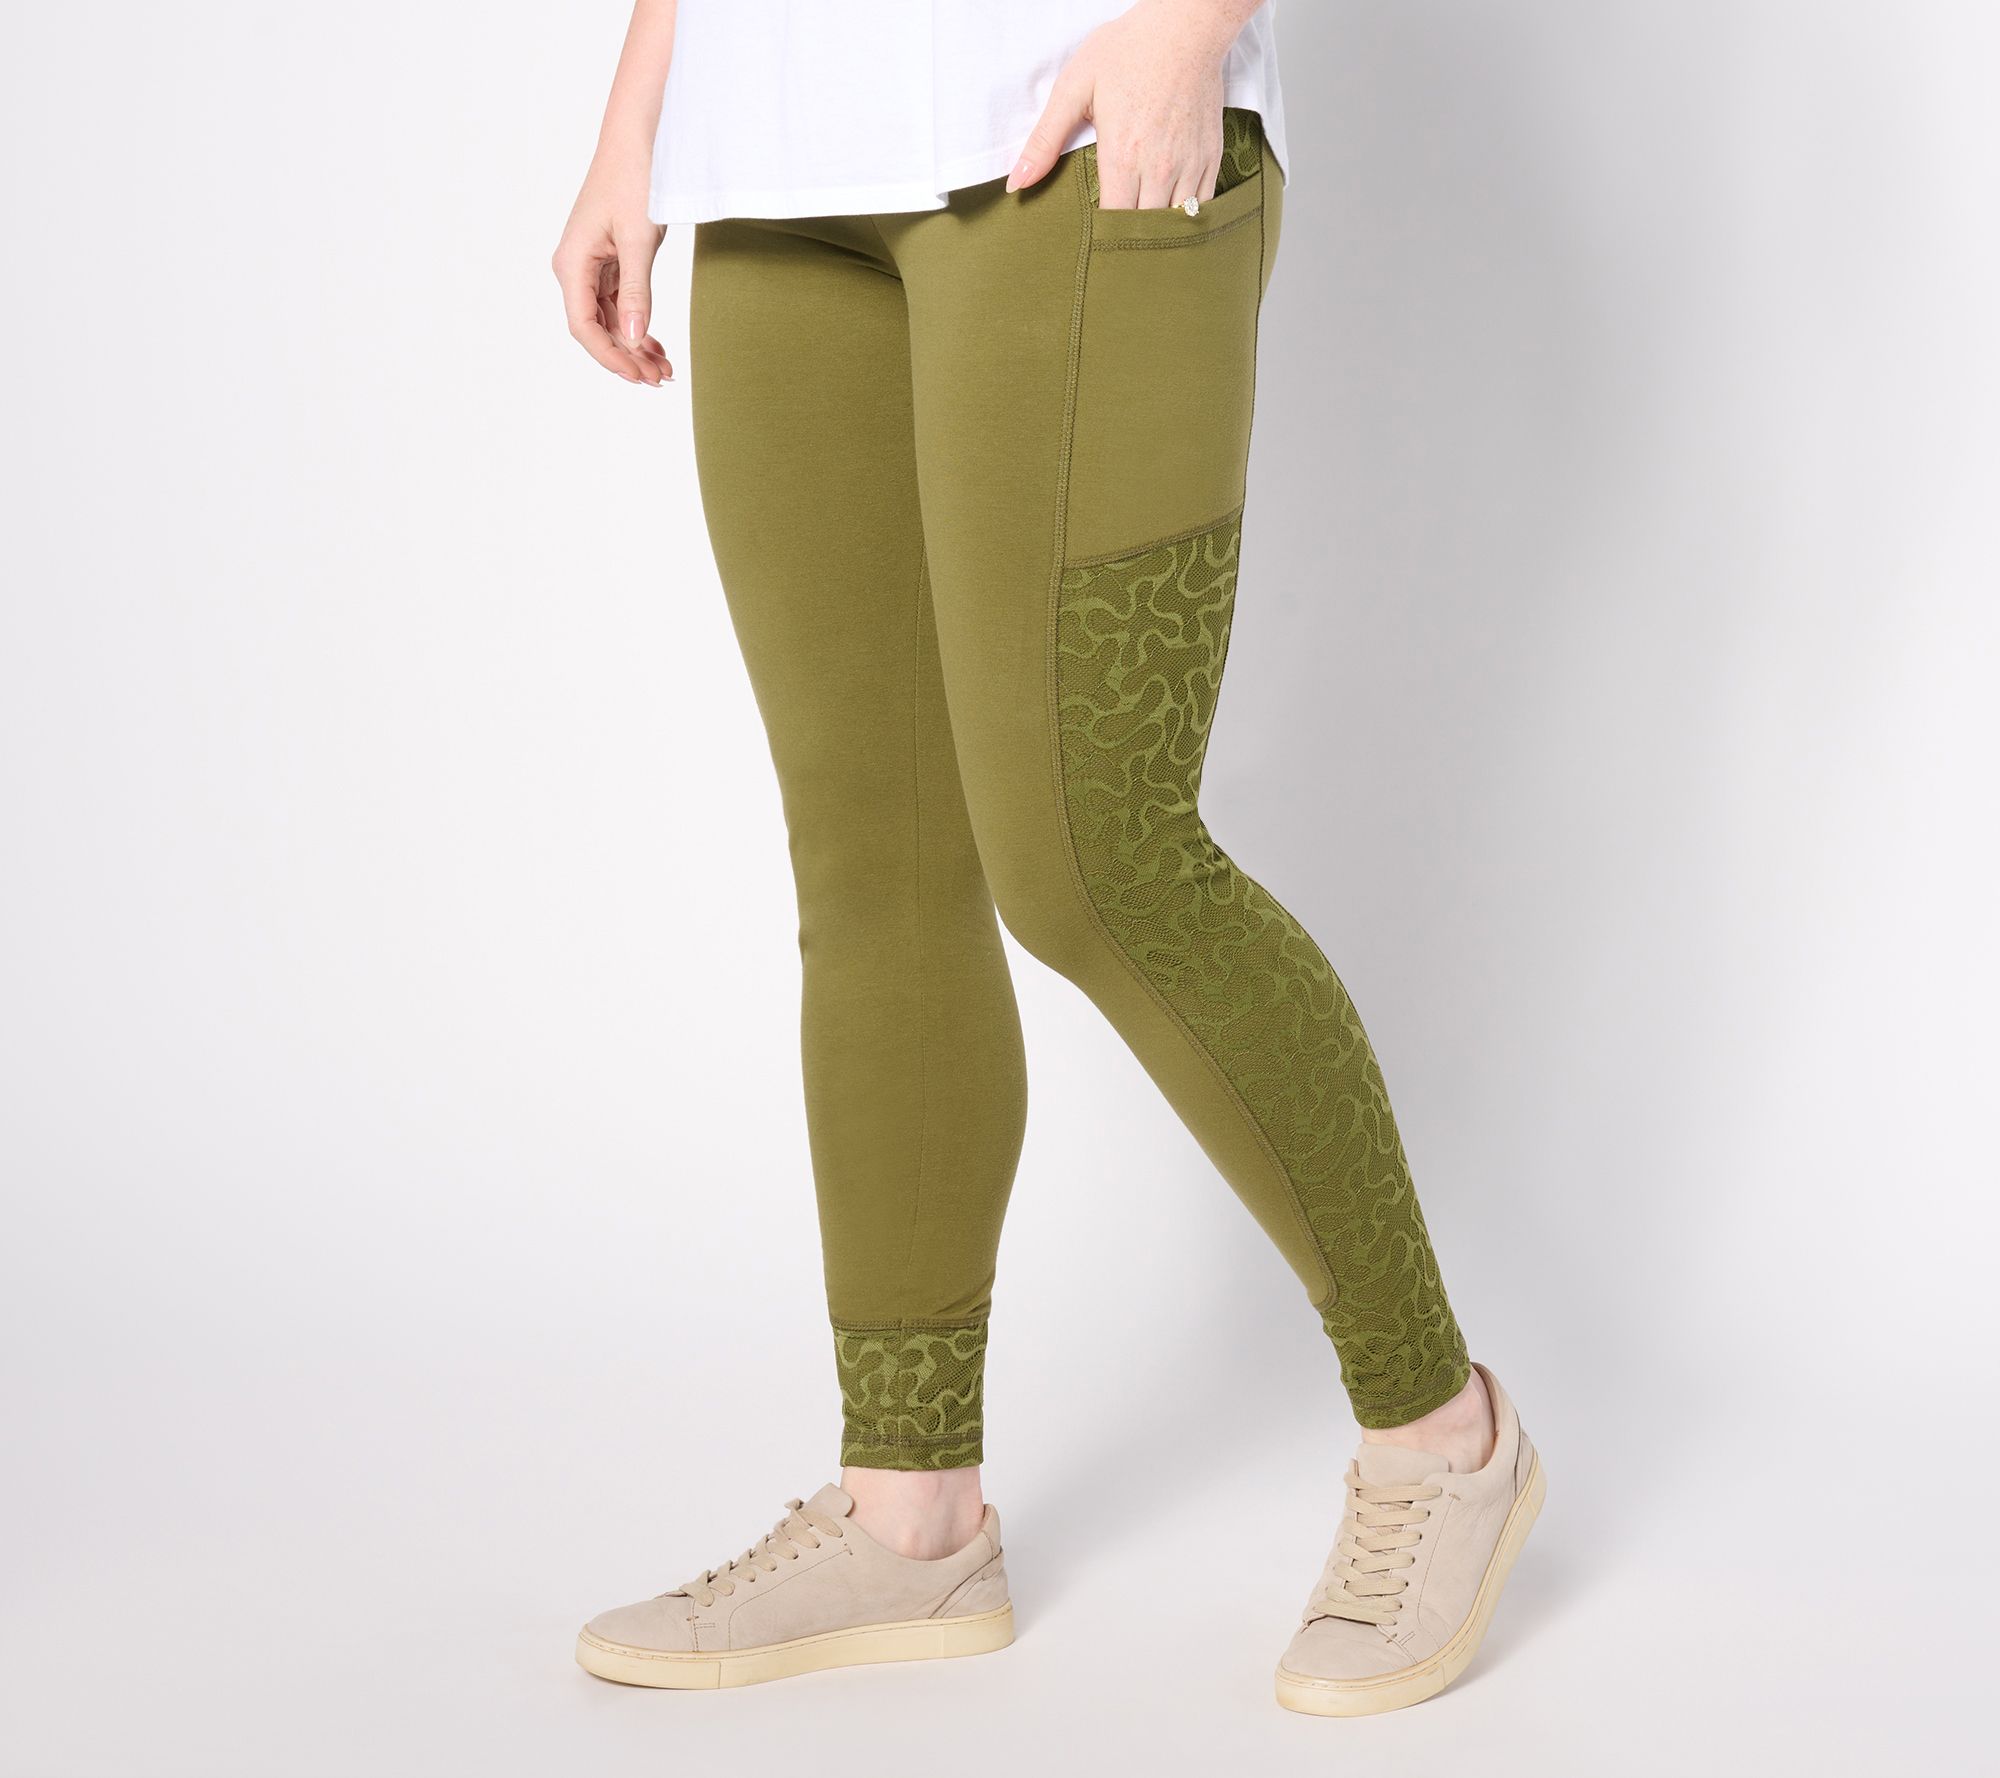 LOGO Layers by Lori Goldstein Petite Printed Crop Leggings with Pockets 